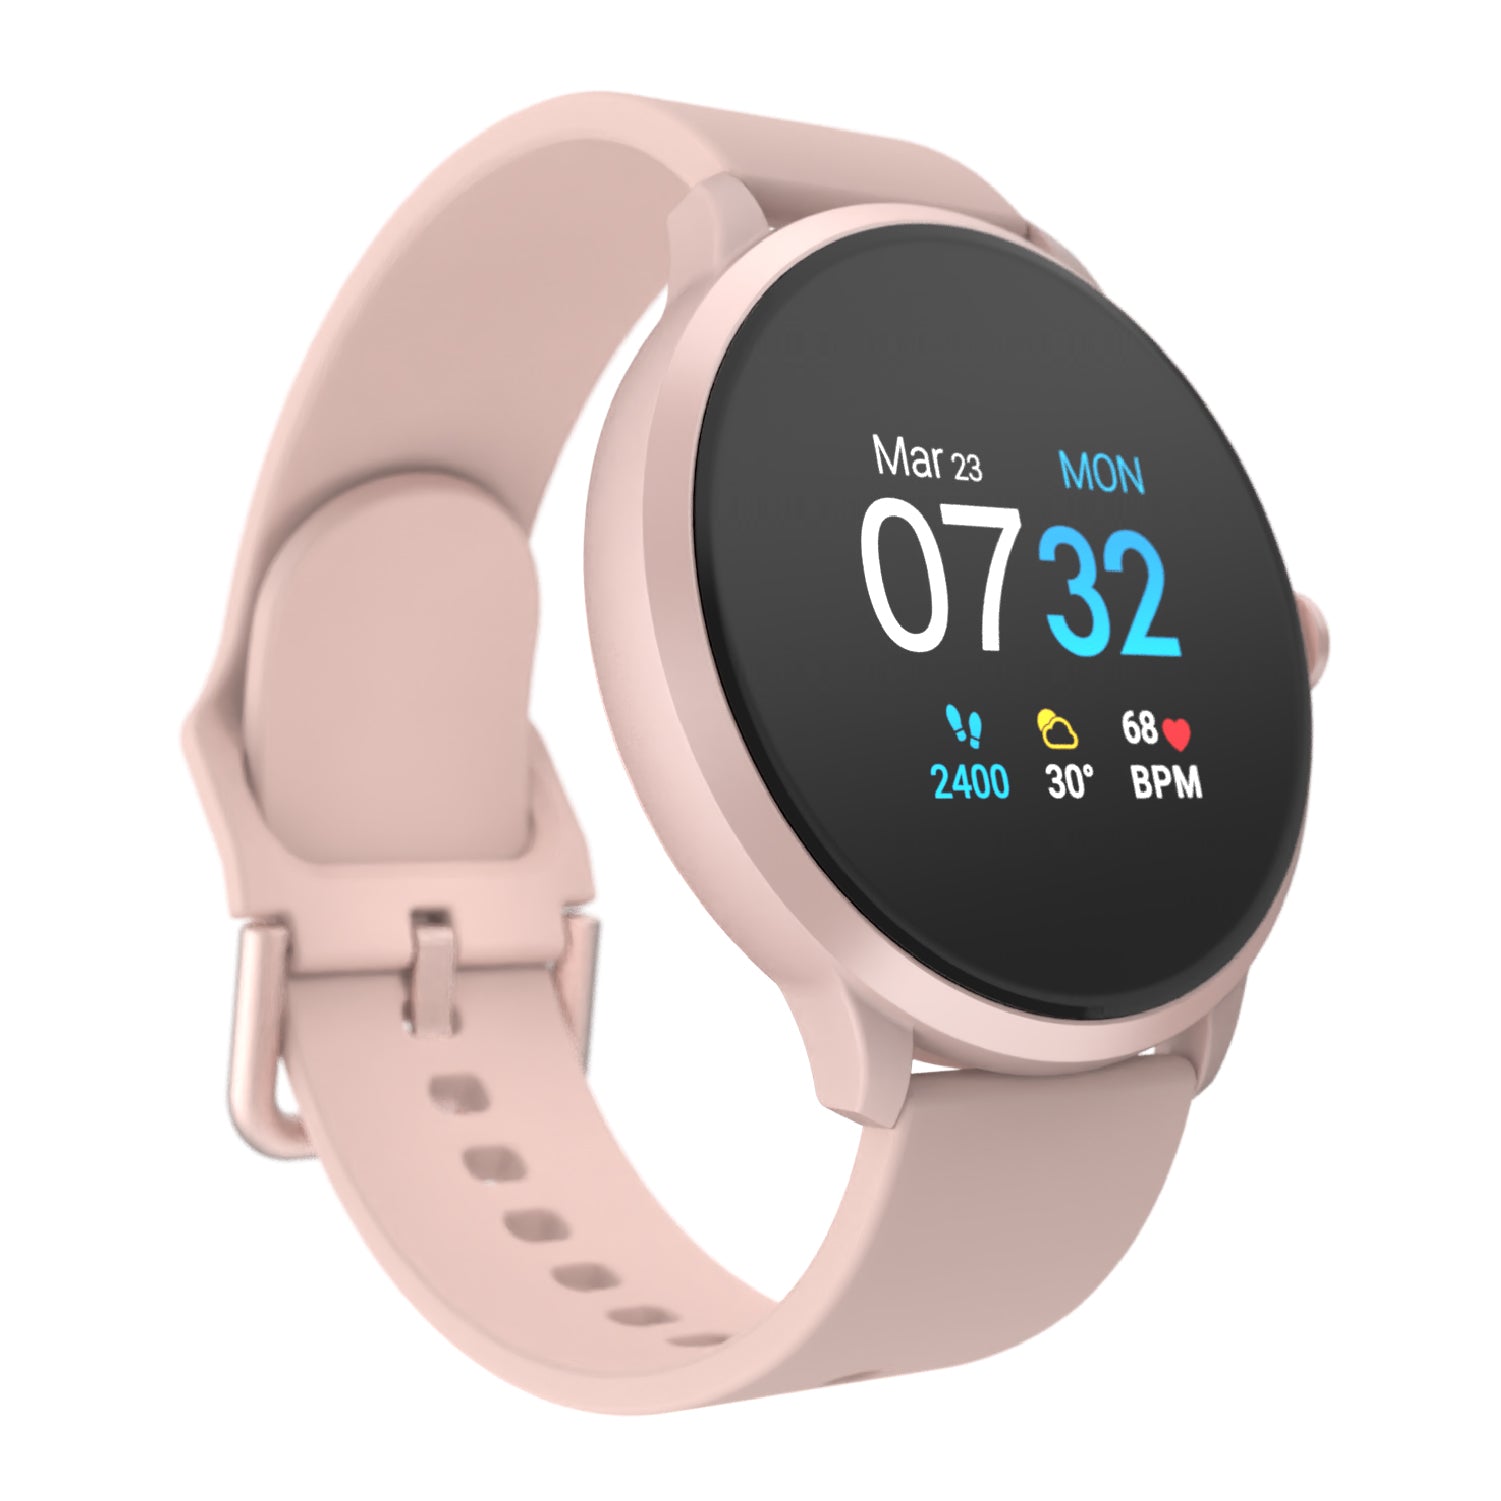 iTouch Sport 3 Smartwatch in Blush with Blush Strap